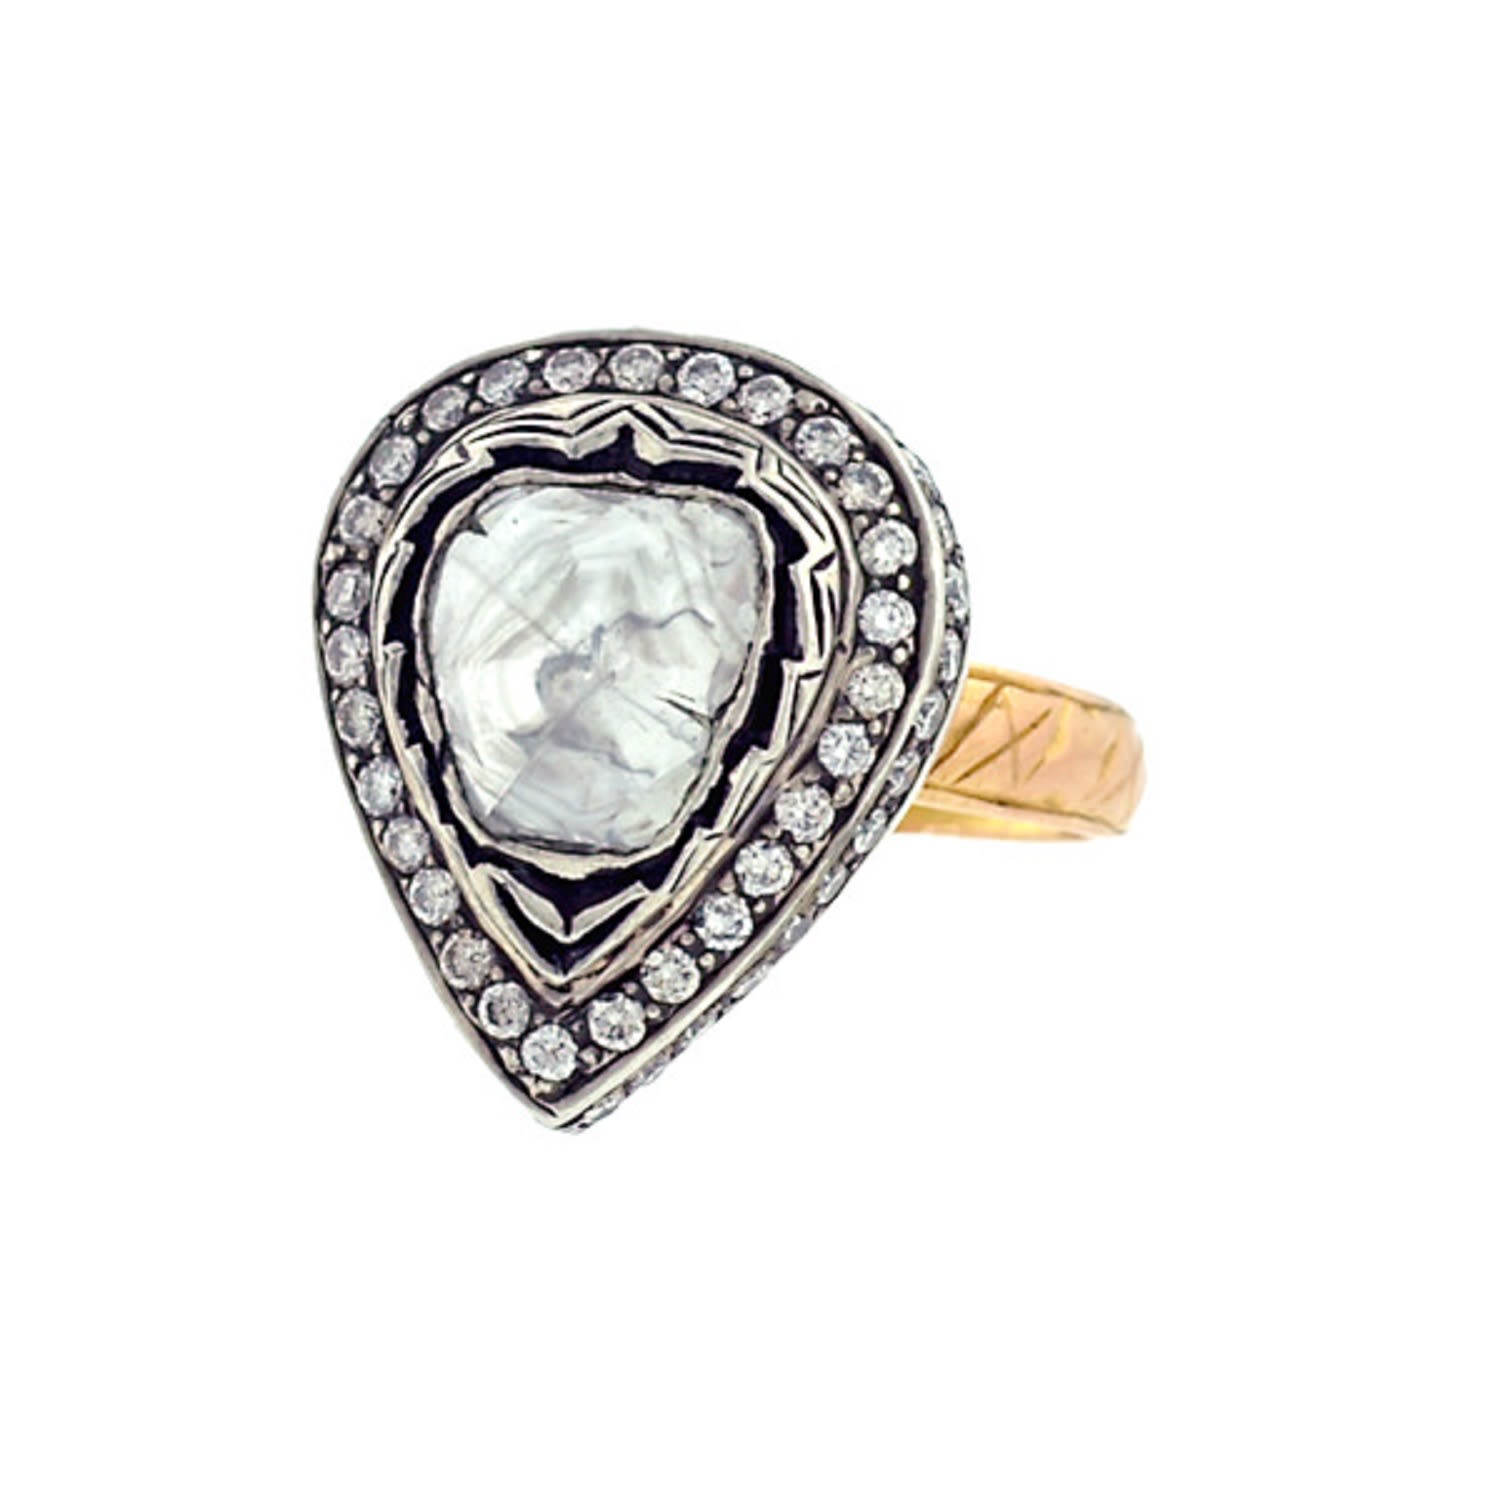 Women’s Silver / Gold / White Uncut Diamond 14K Solid Gold 925 Sterling Silver Pear Ring Jewelry Artisan